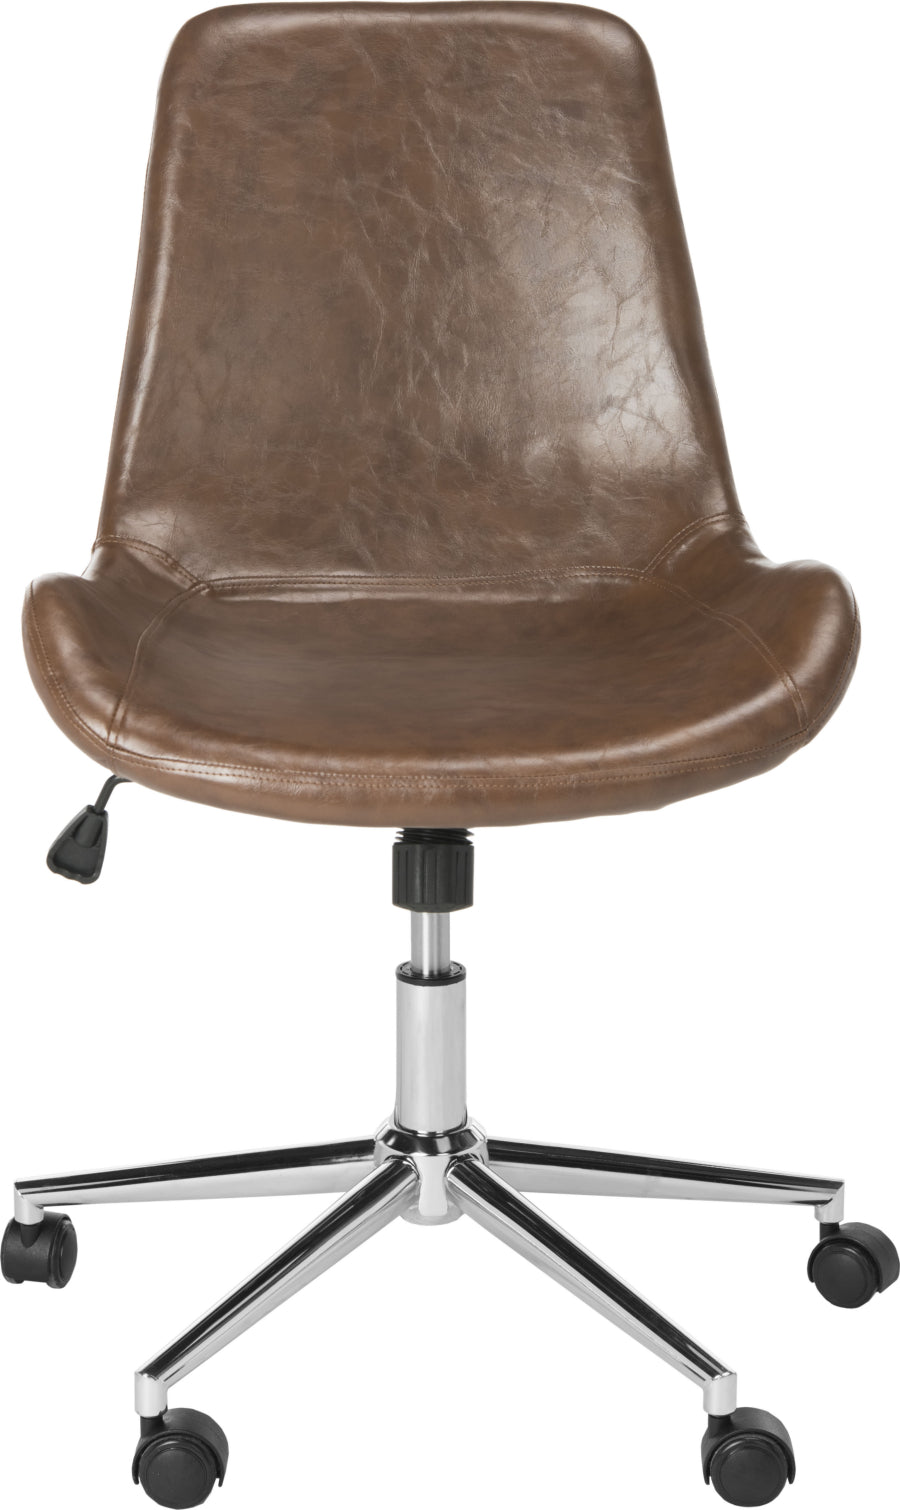 Safavieh Fletcher Swivel Office Chair Brown and Chrome Furniture main image